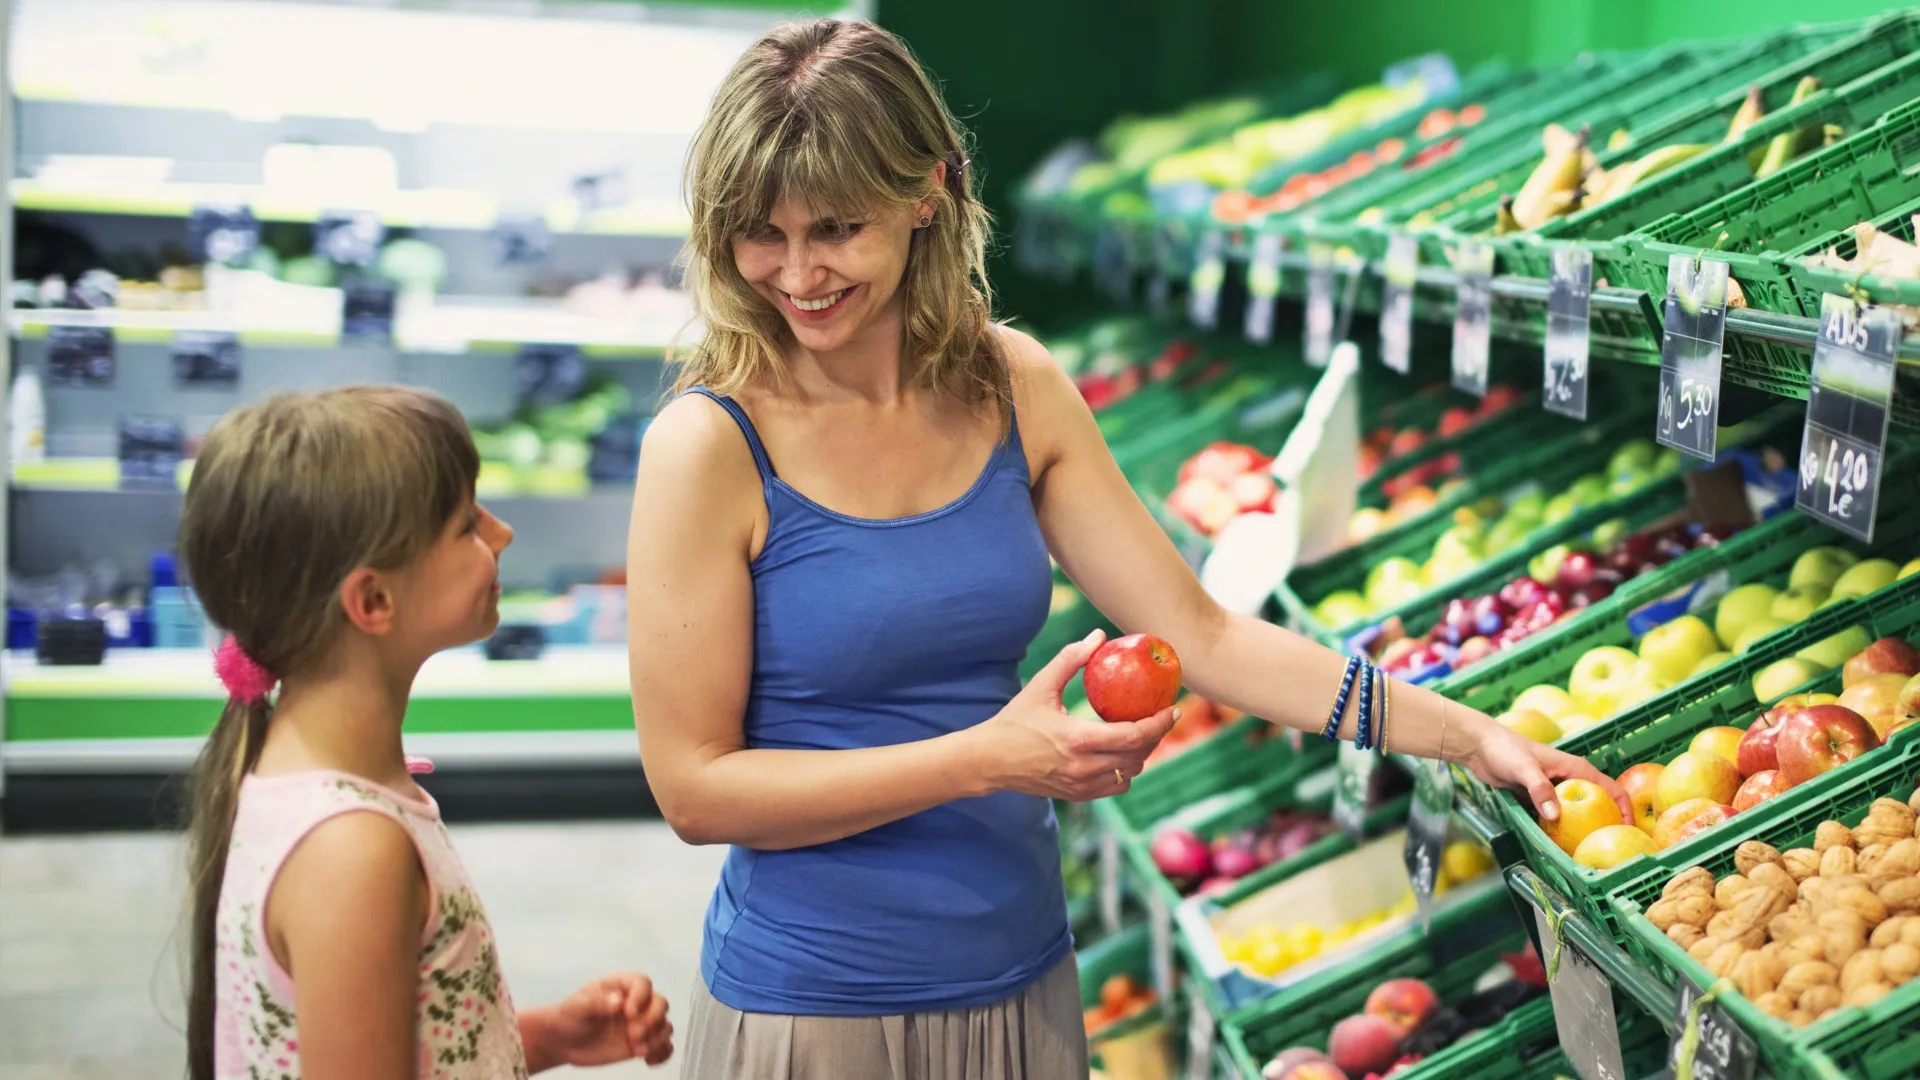 Mother and daughter buying groceries at a supermarket store stock photo